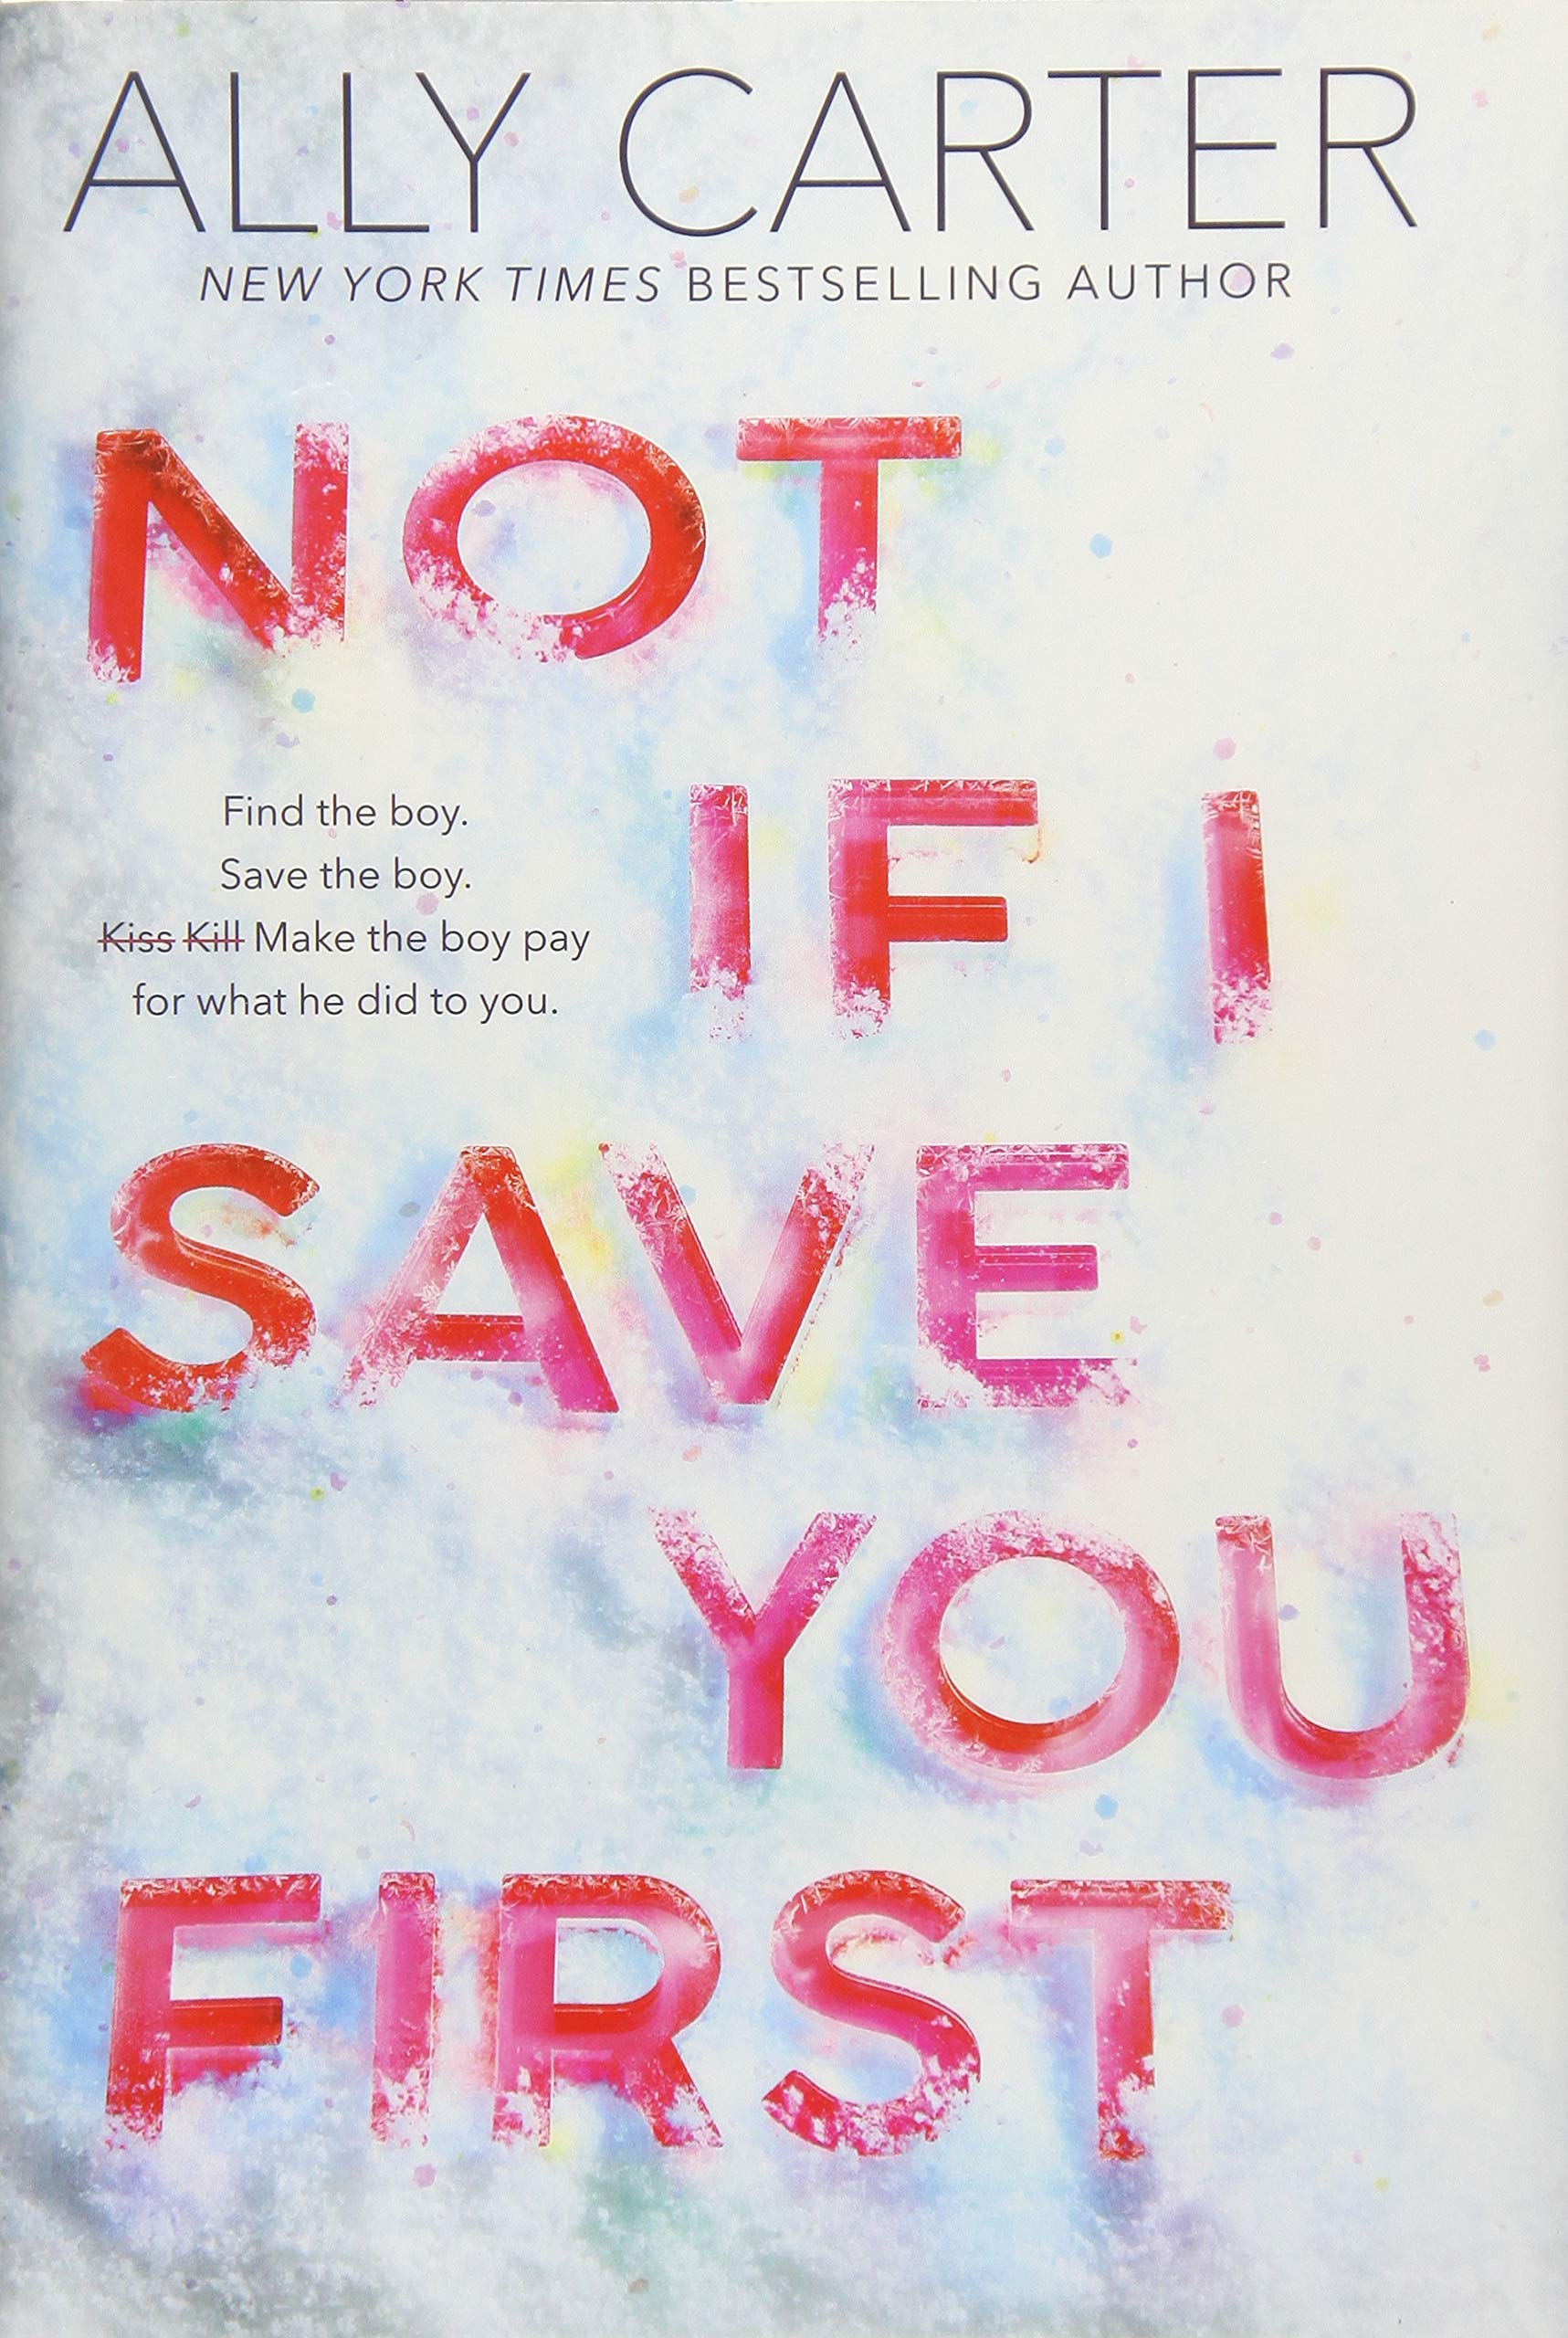 Image of book cover, photo of snow, with title, "Not If I Save You First," written in red letters partially buried in the snow